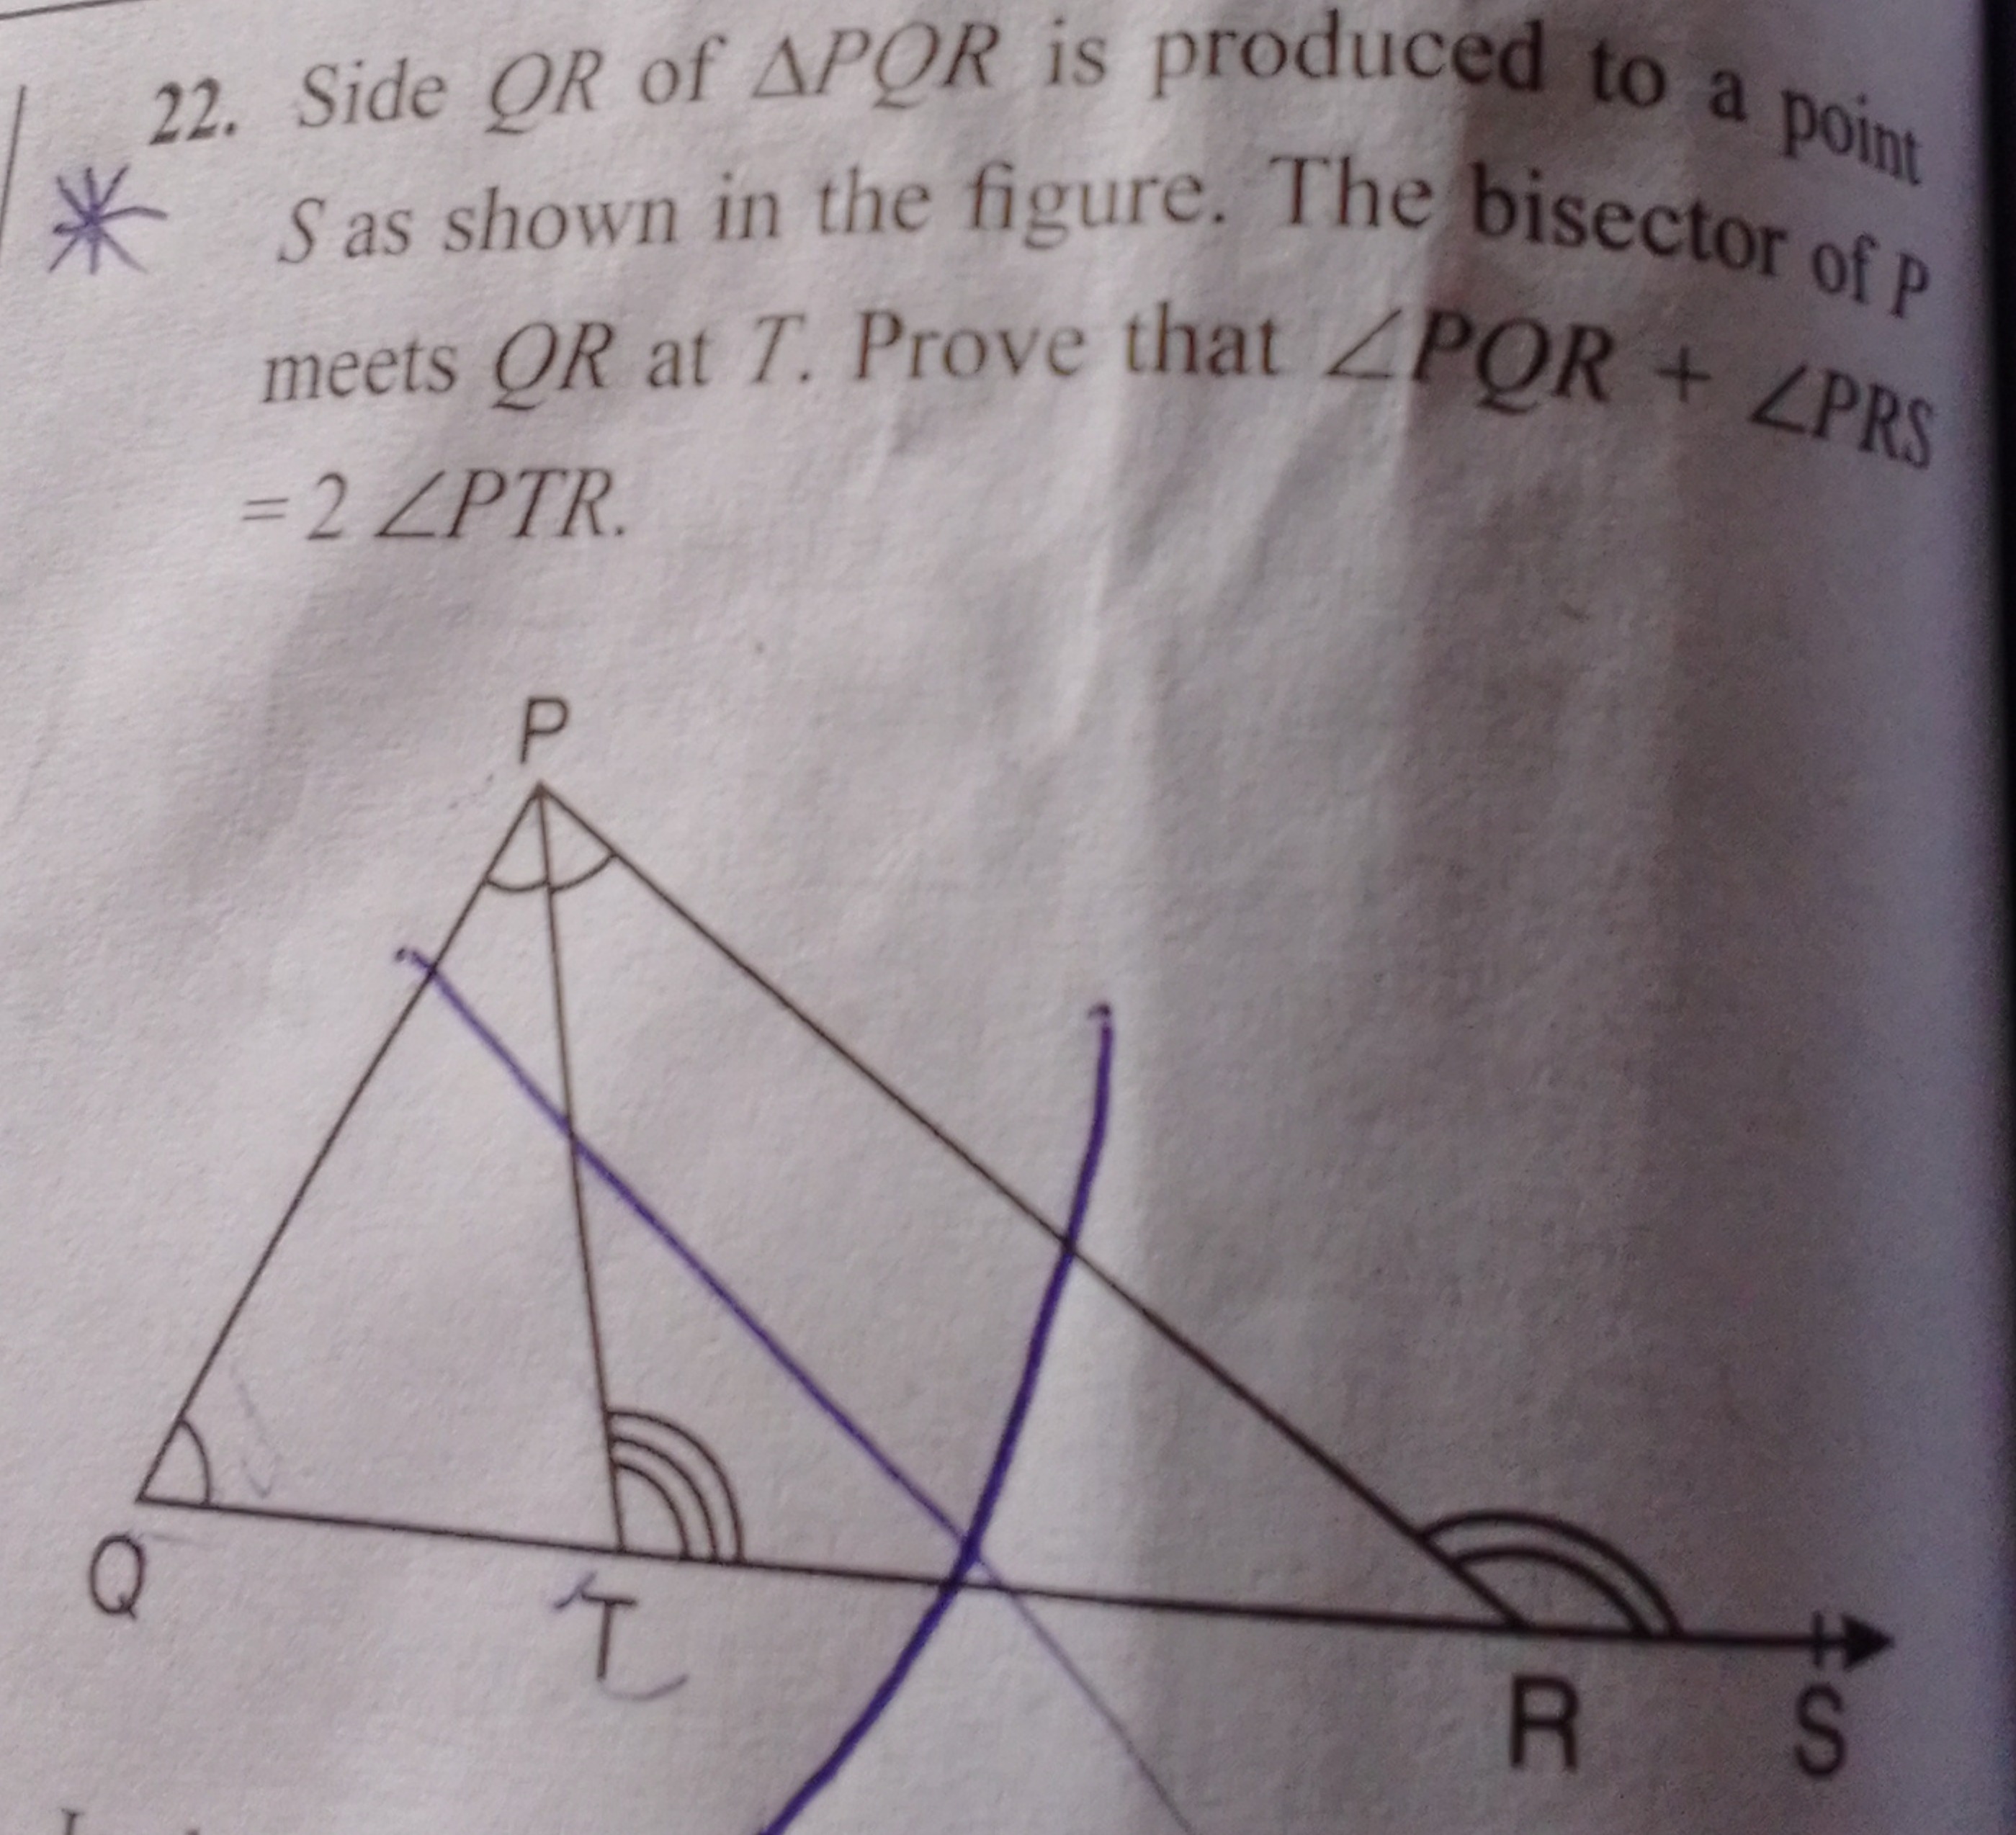 22. Side QR of △PQR is produced to a point * S as shown in the figure.